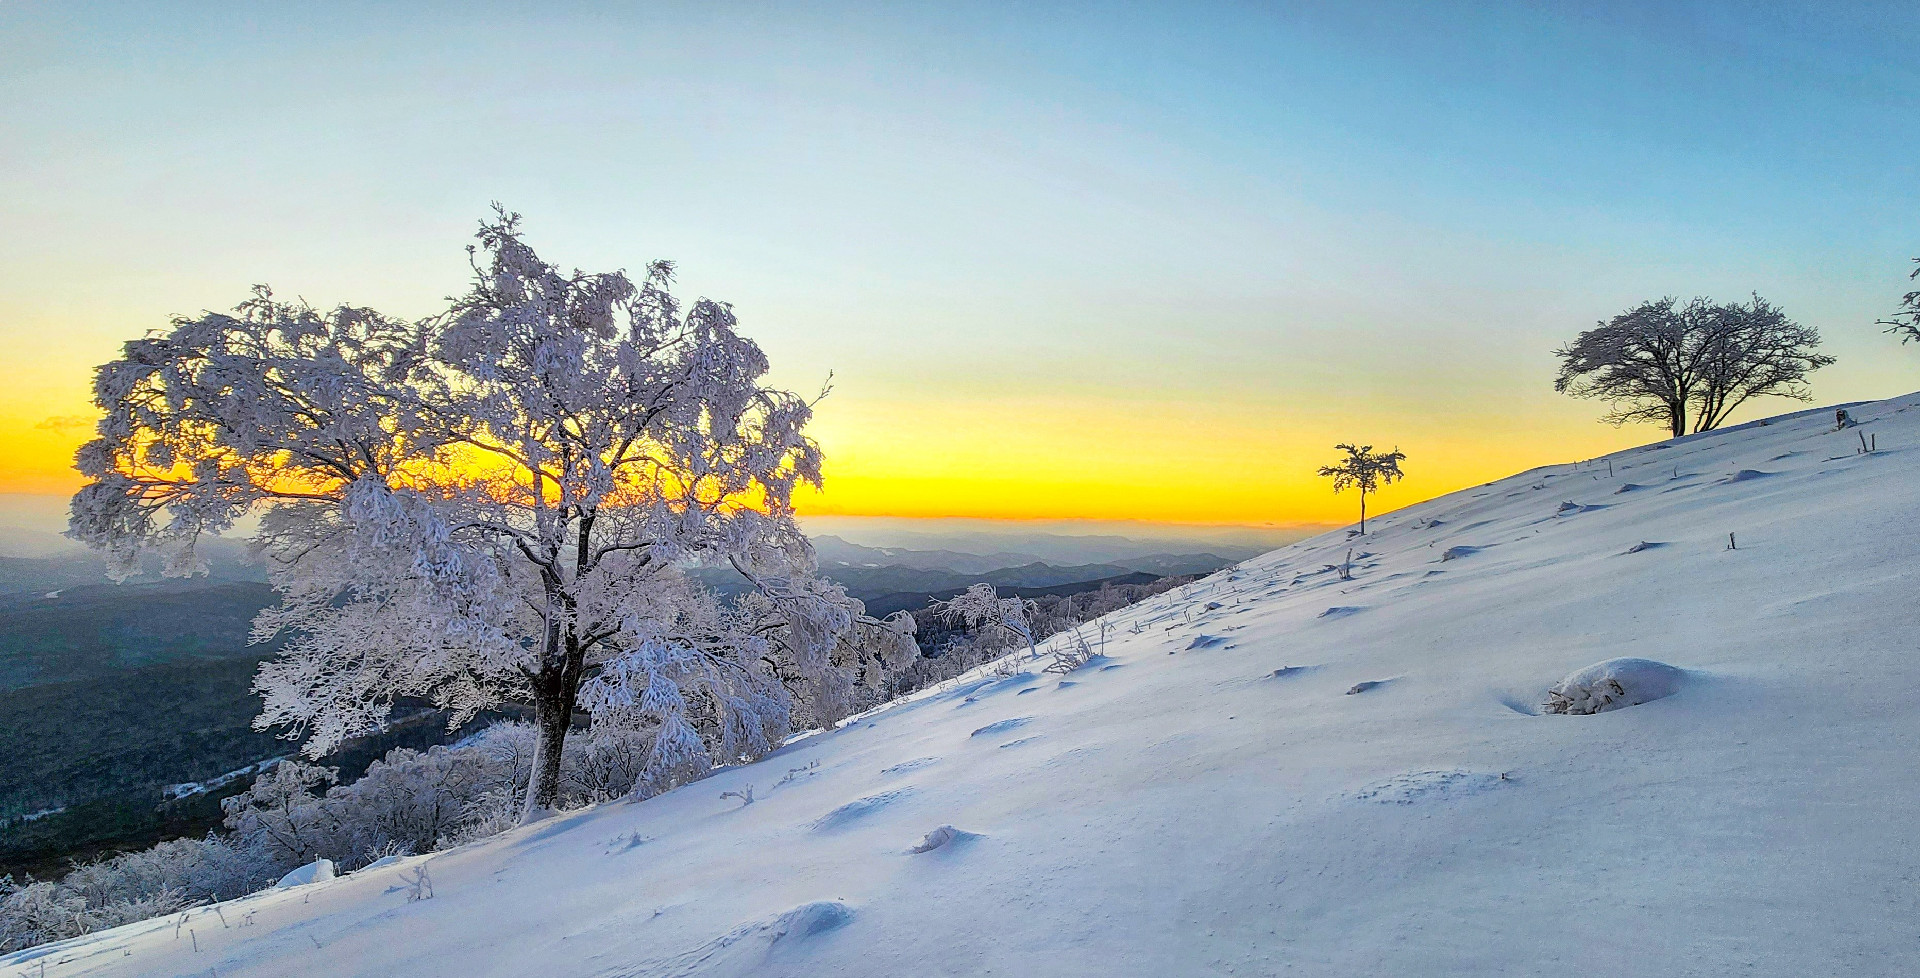 Jilin’s Sifang Mountain presents winter rime spectacle